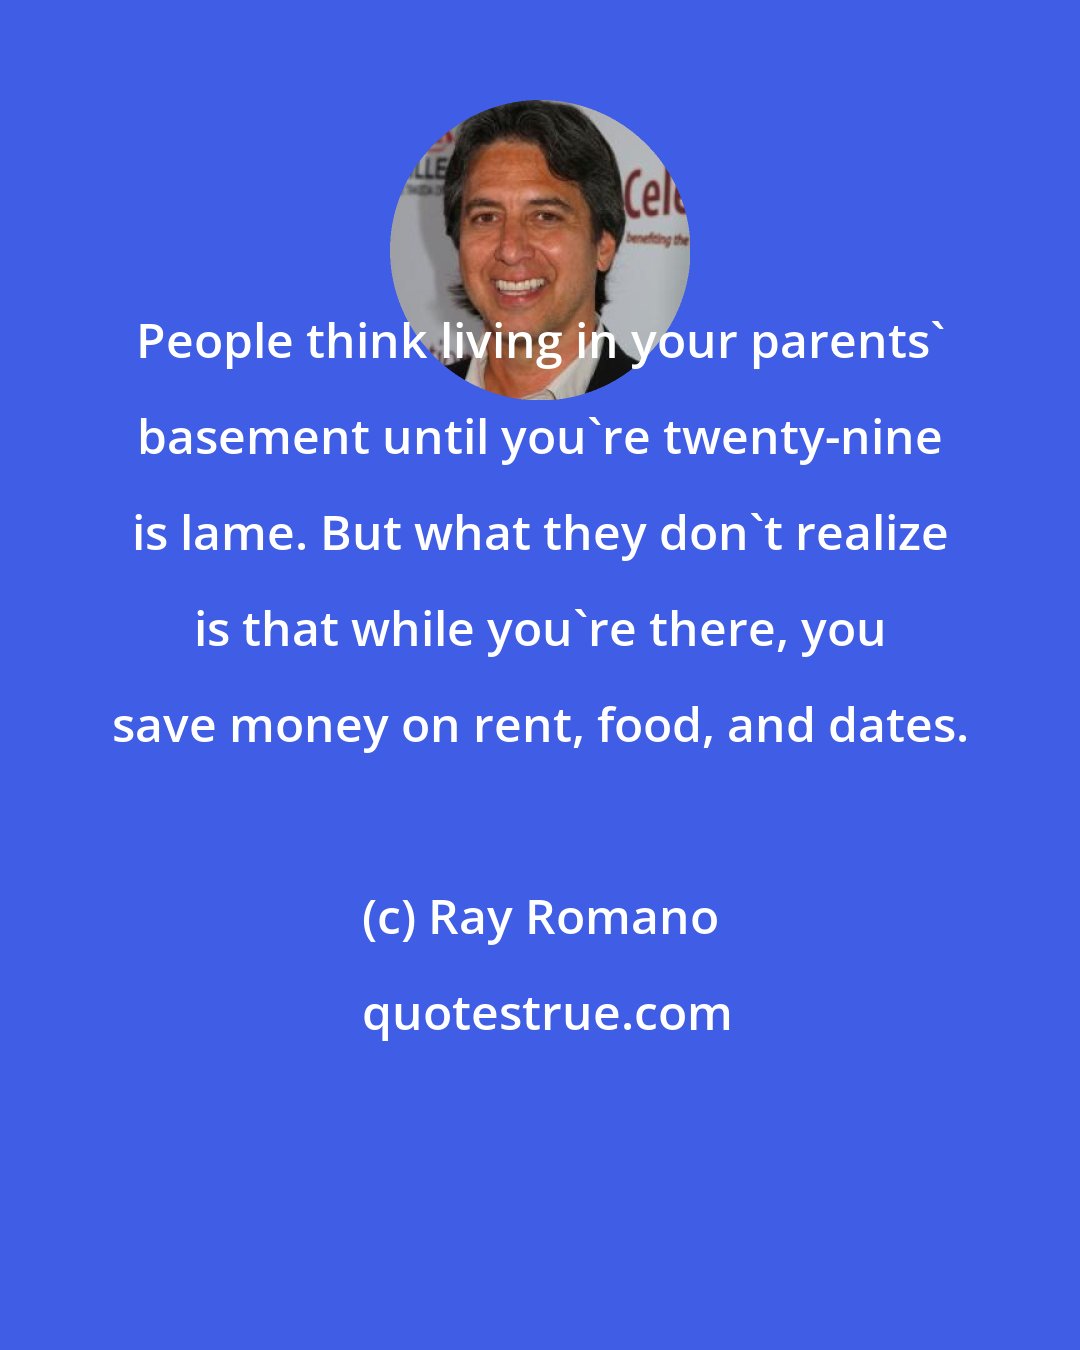 Ray Romano: People think living in your parents' basement until you're twenty-nine is lame. But what they don't realize is that while you're there, you save money on rent, food, and dates.